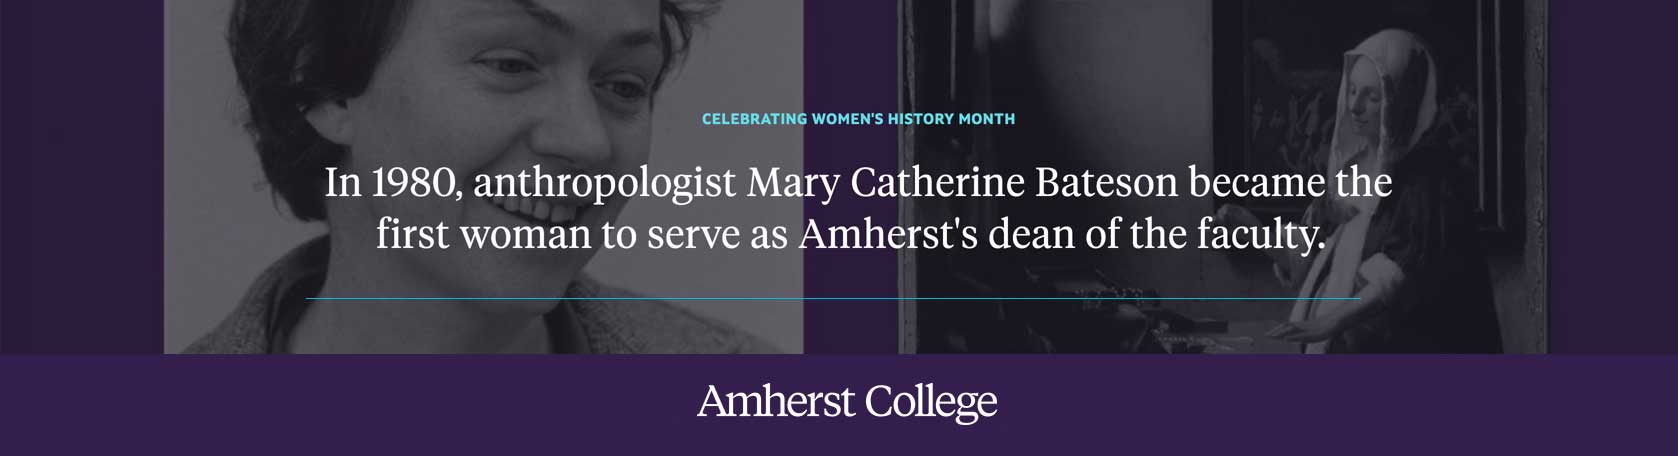 In 1980, anthropologist Mary Catherine Bateson became the first women to serve as dean of the faculty